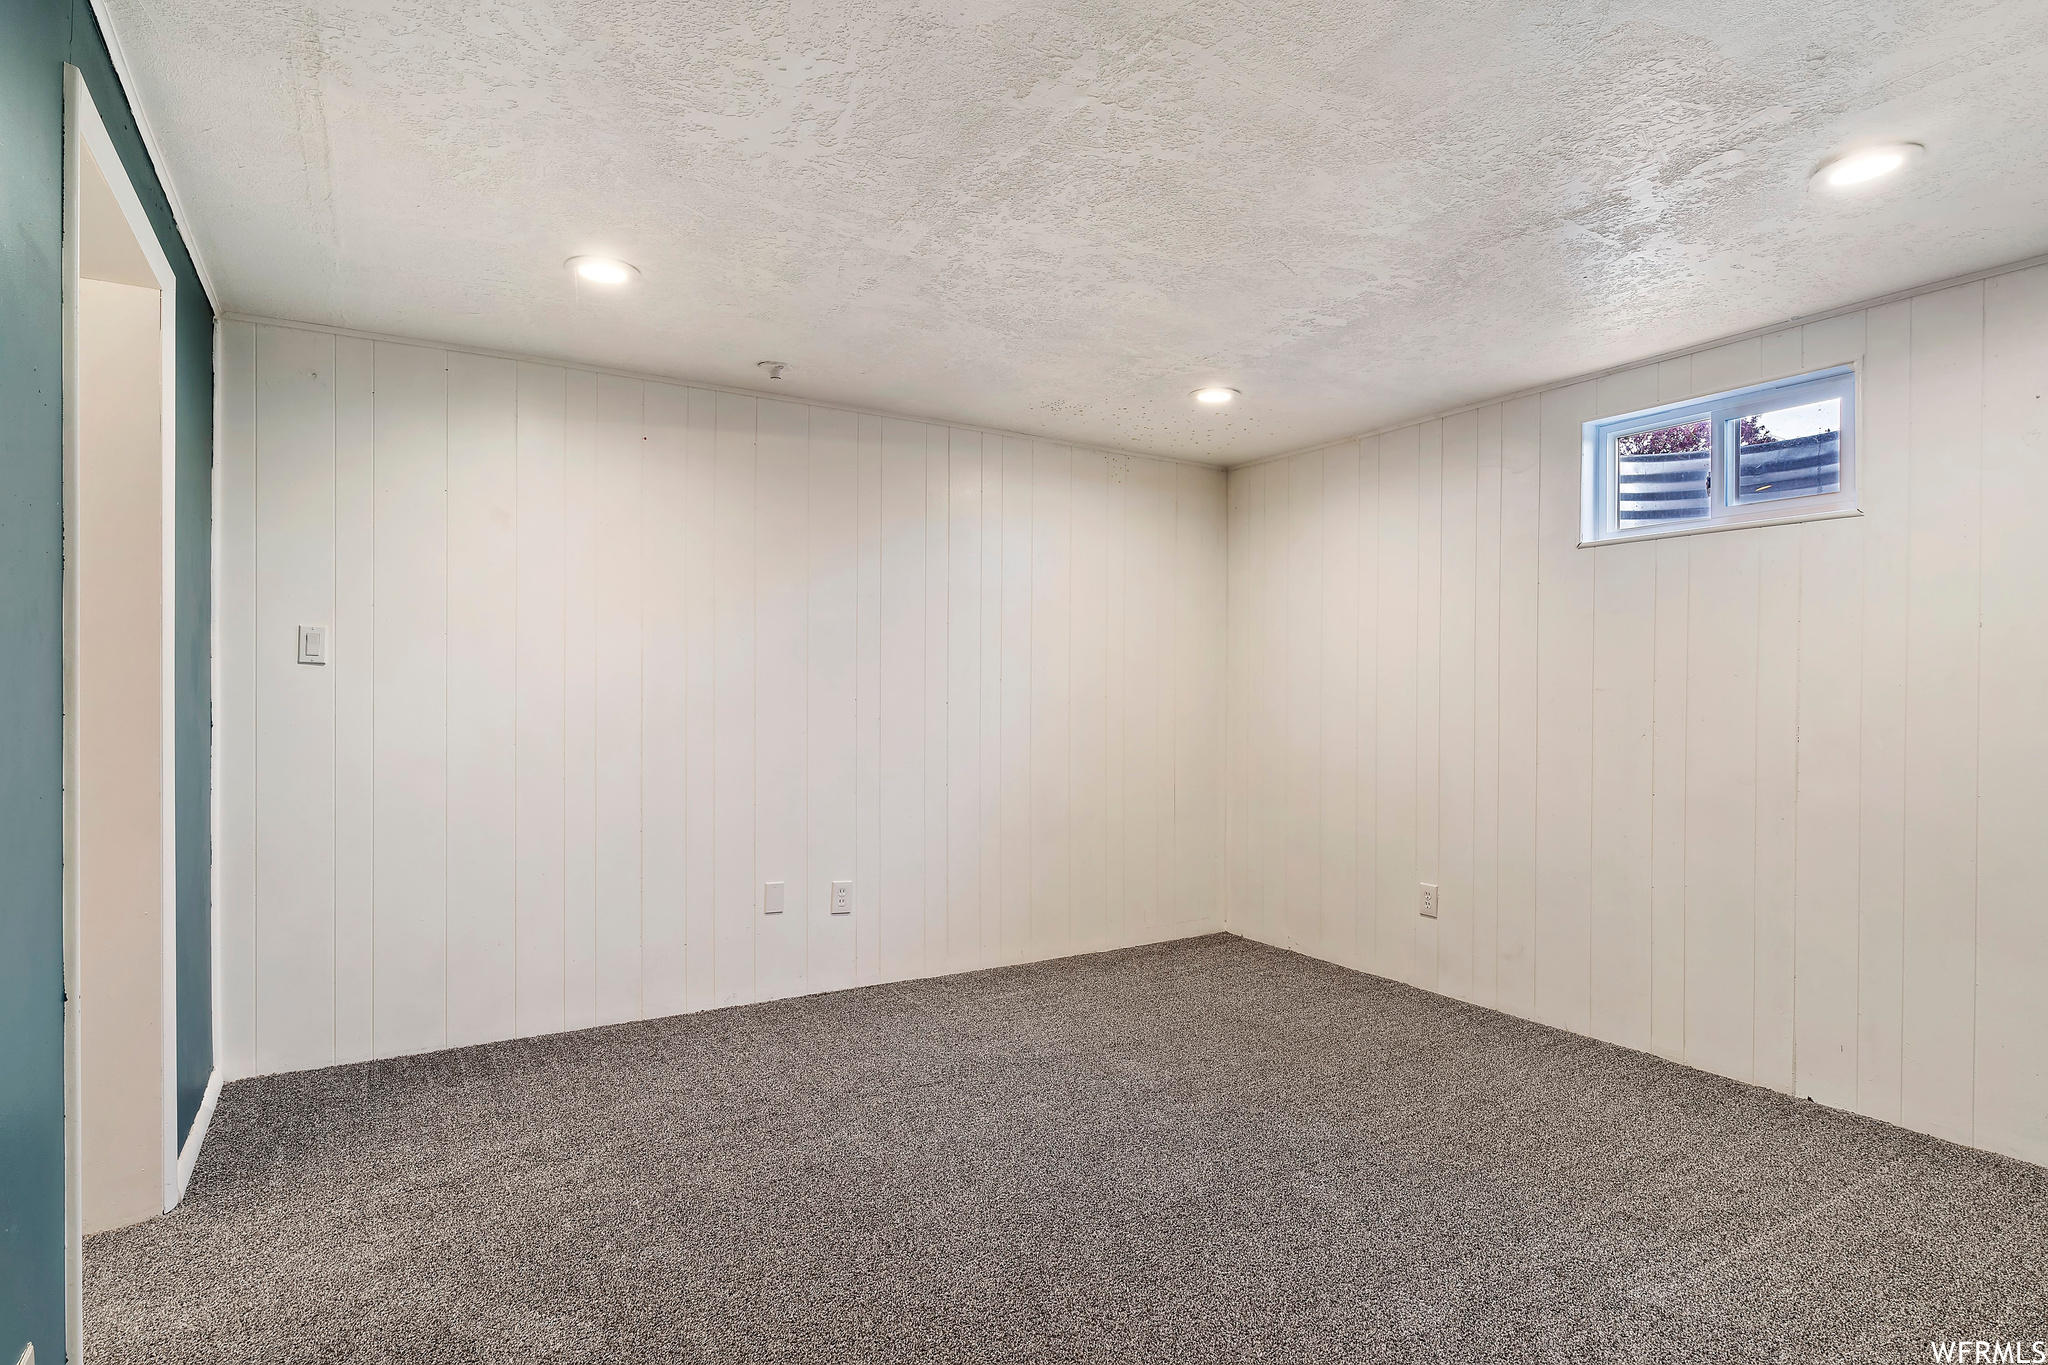 Basement with a textured ceiling and dark colored carpet